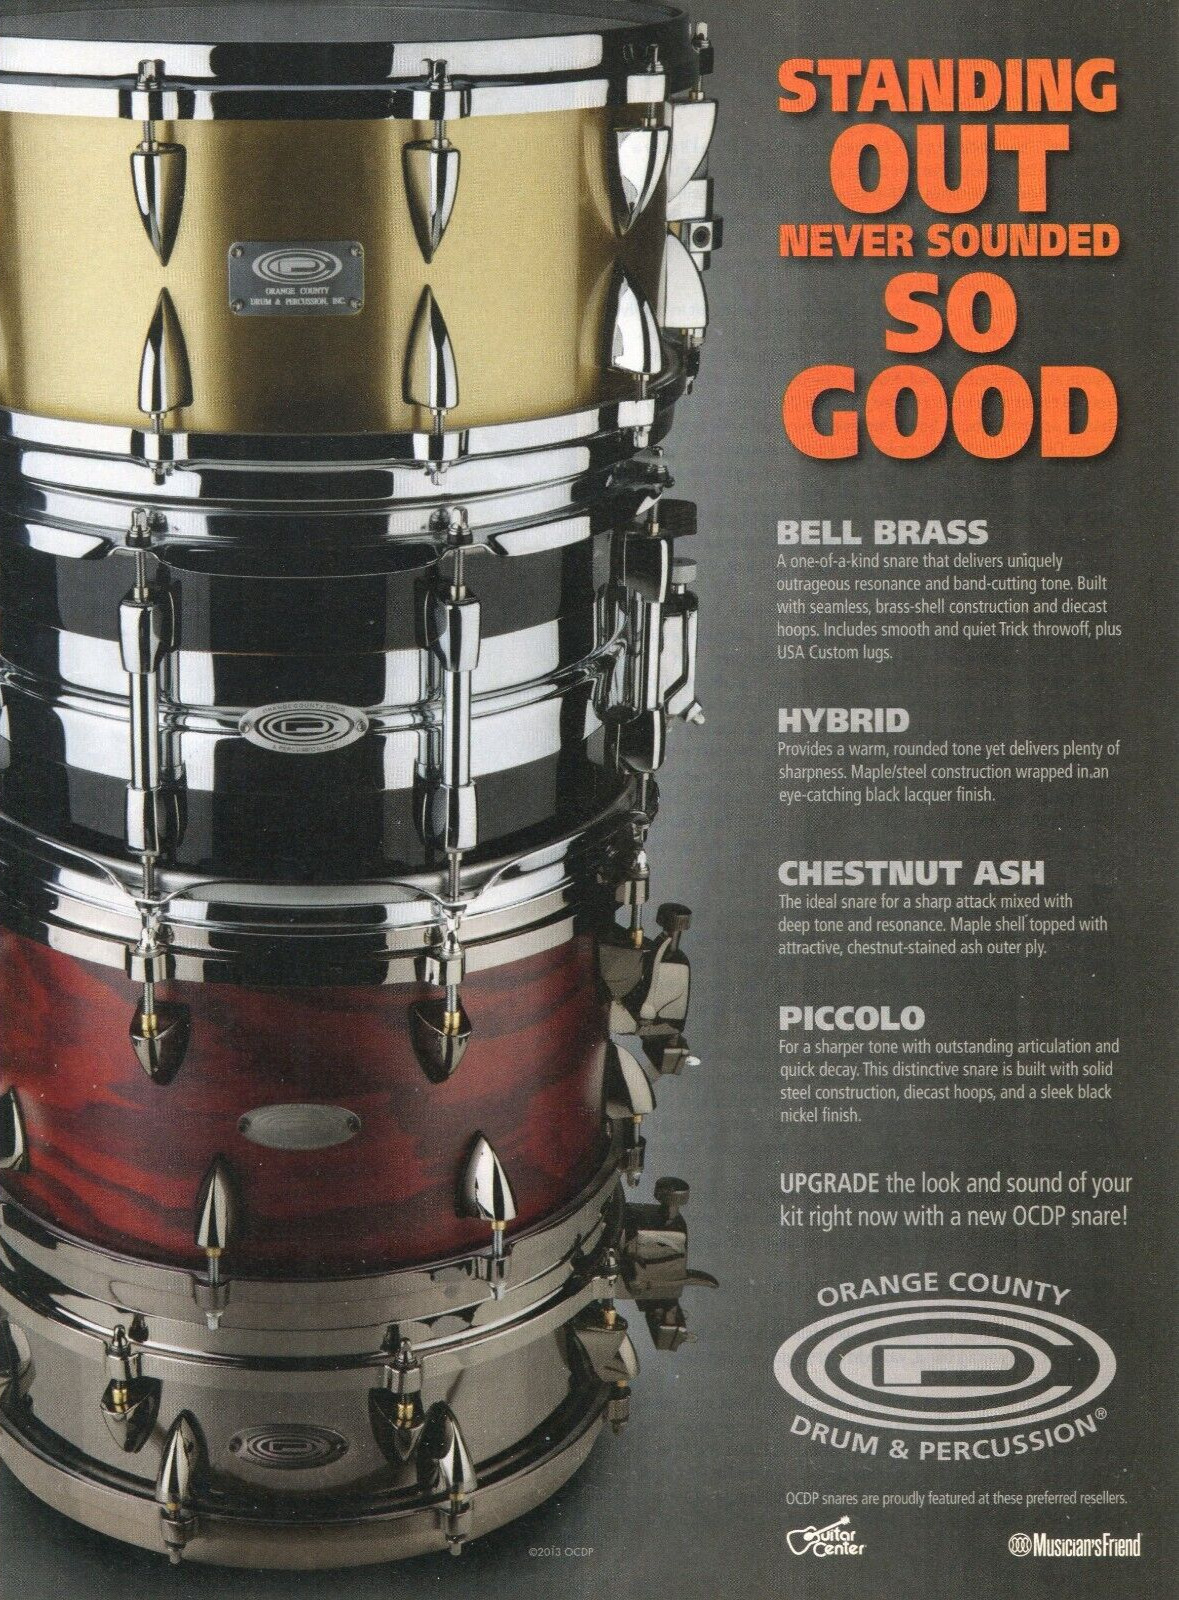 2013 Print Ad of OCDP Orange County Drum & Percussion Snare Drums